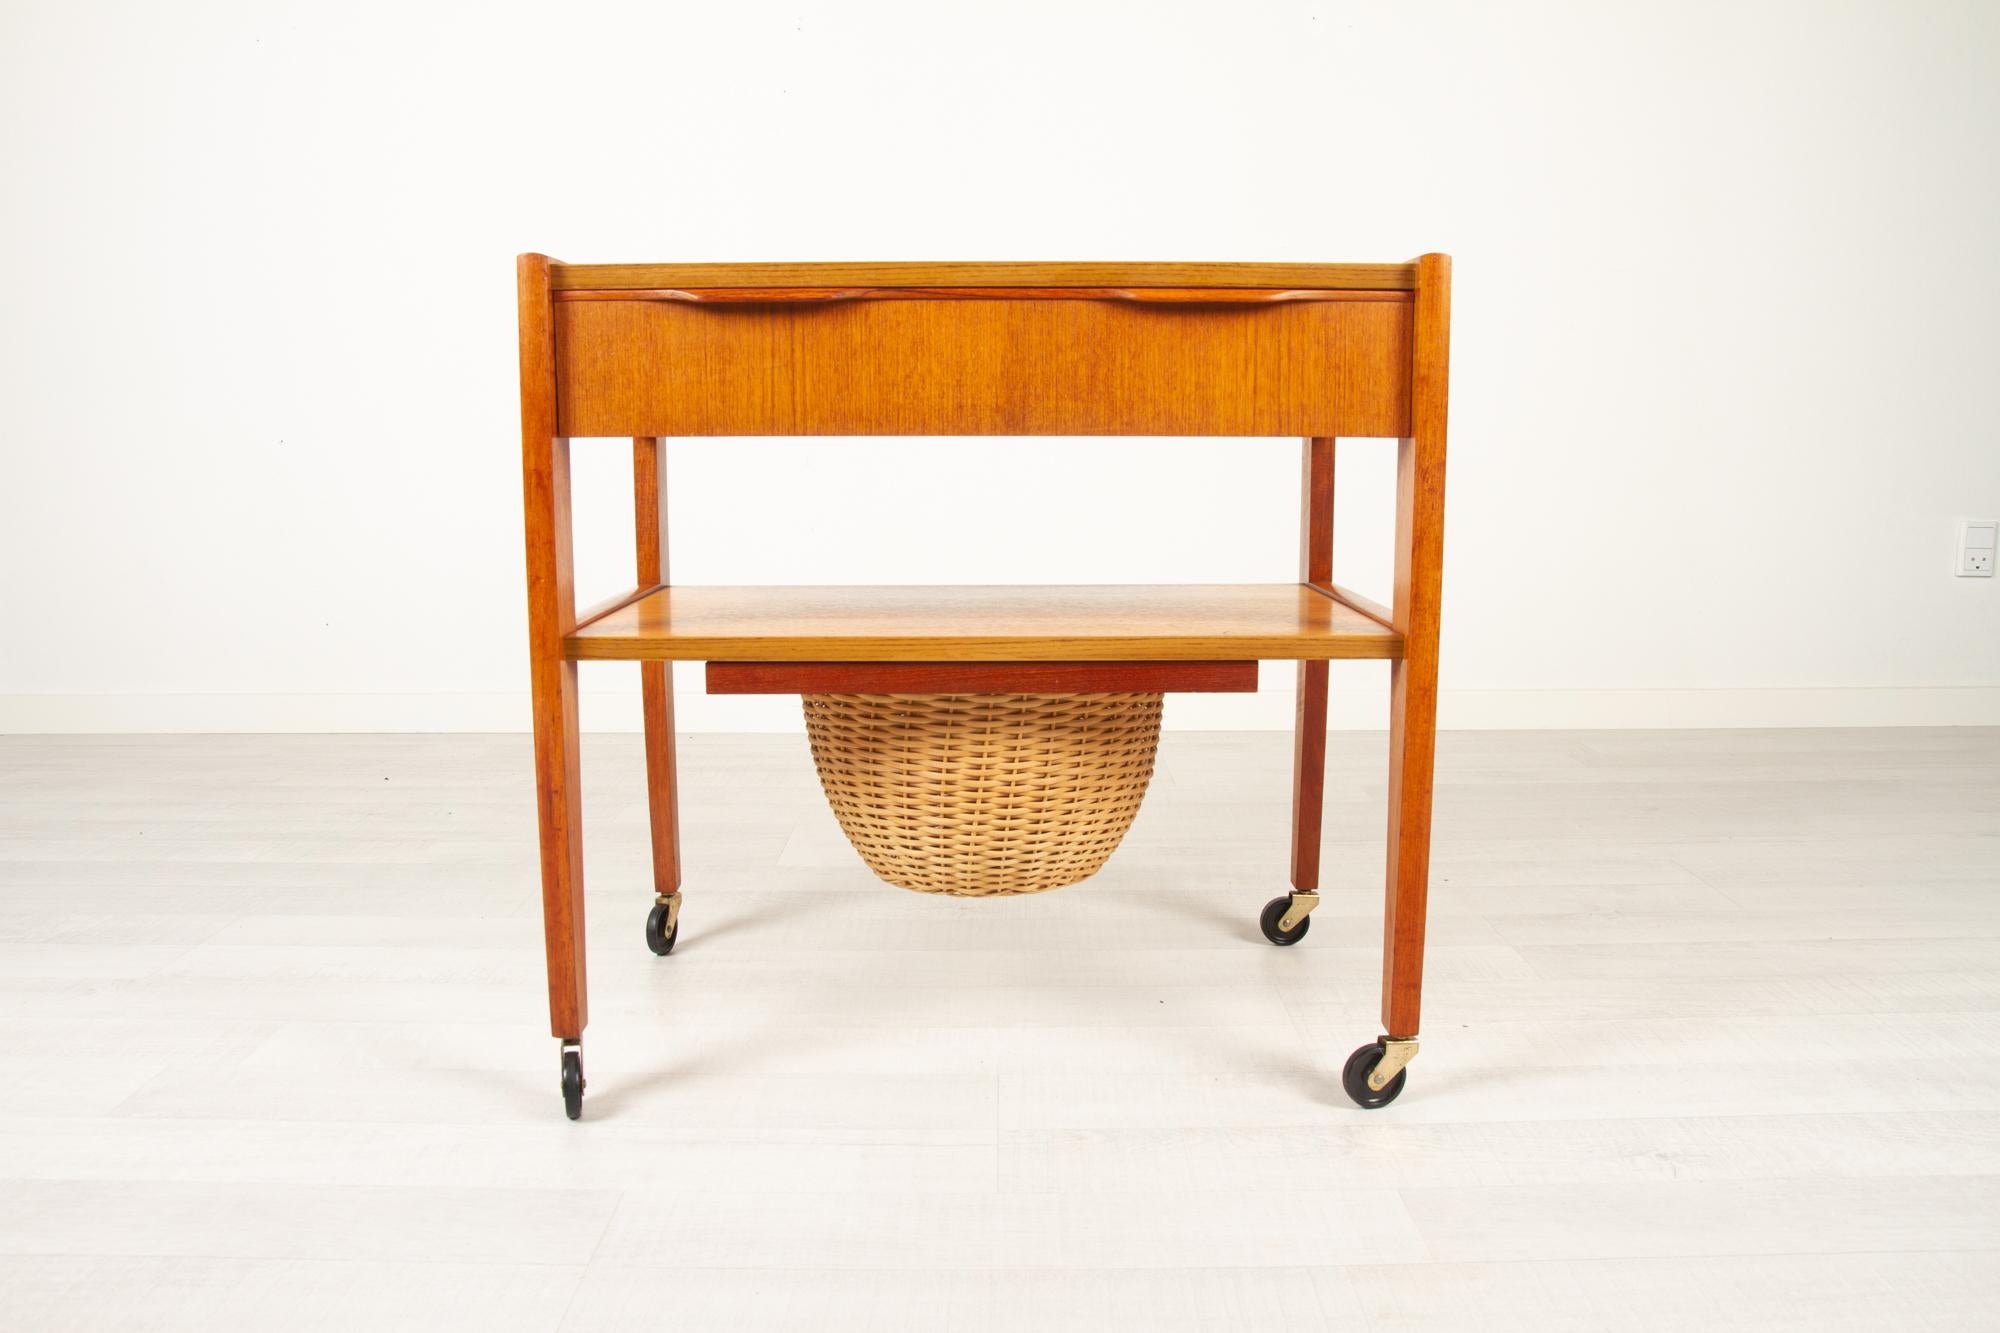 Vintage Danish sewing table, 1960s
Danish modern oak and teak sewing cart on casters. Wide drawer with sculpted double pulls. Original draw out cane basket. Ideal as a side or lamp table. 
Cleaned and polished. Some watermarks on top.